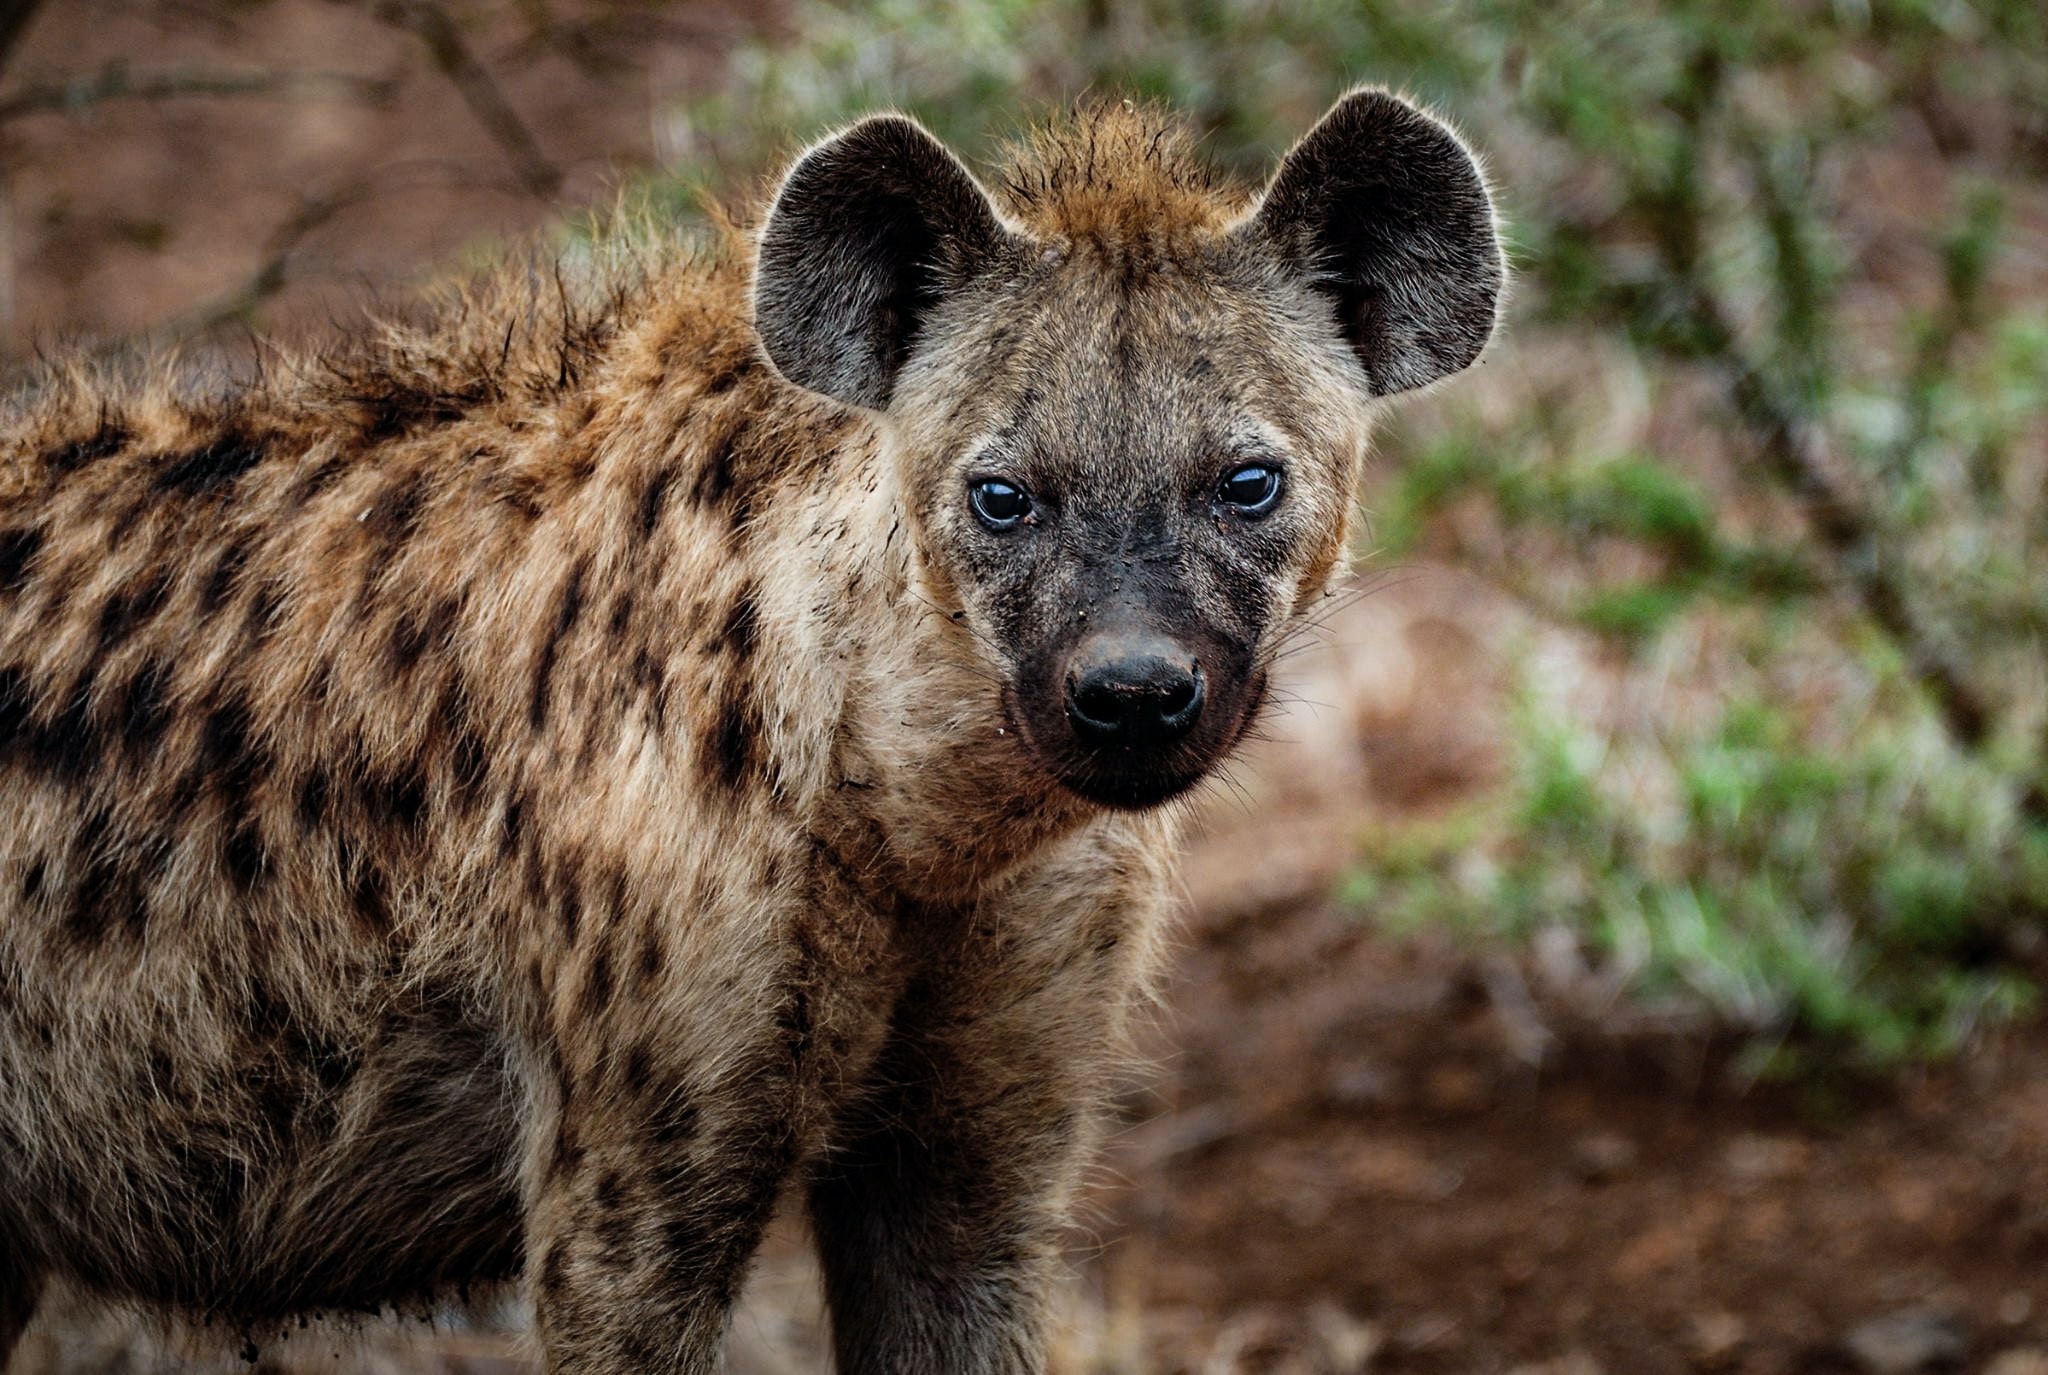 Tips for Zoom or Teams meeting to present like a hyena